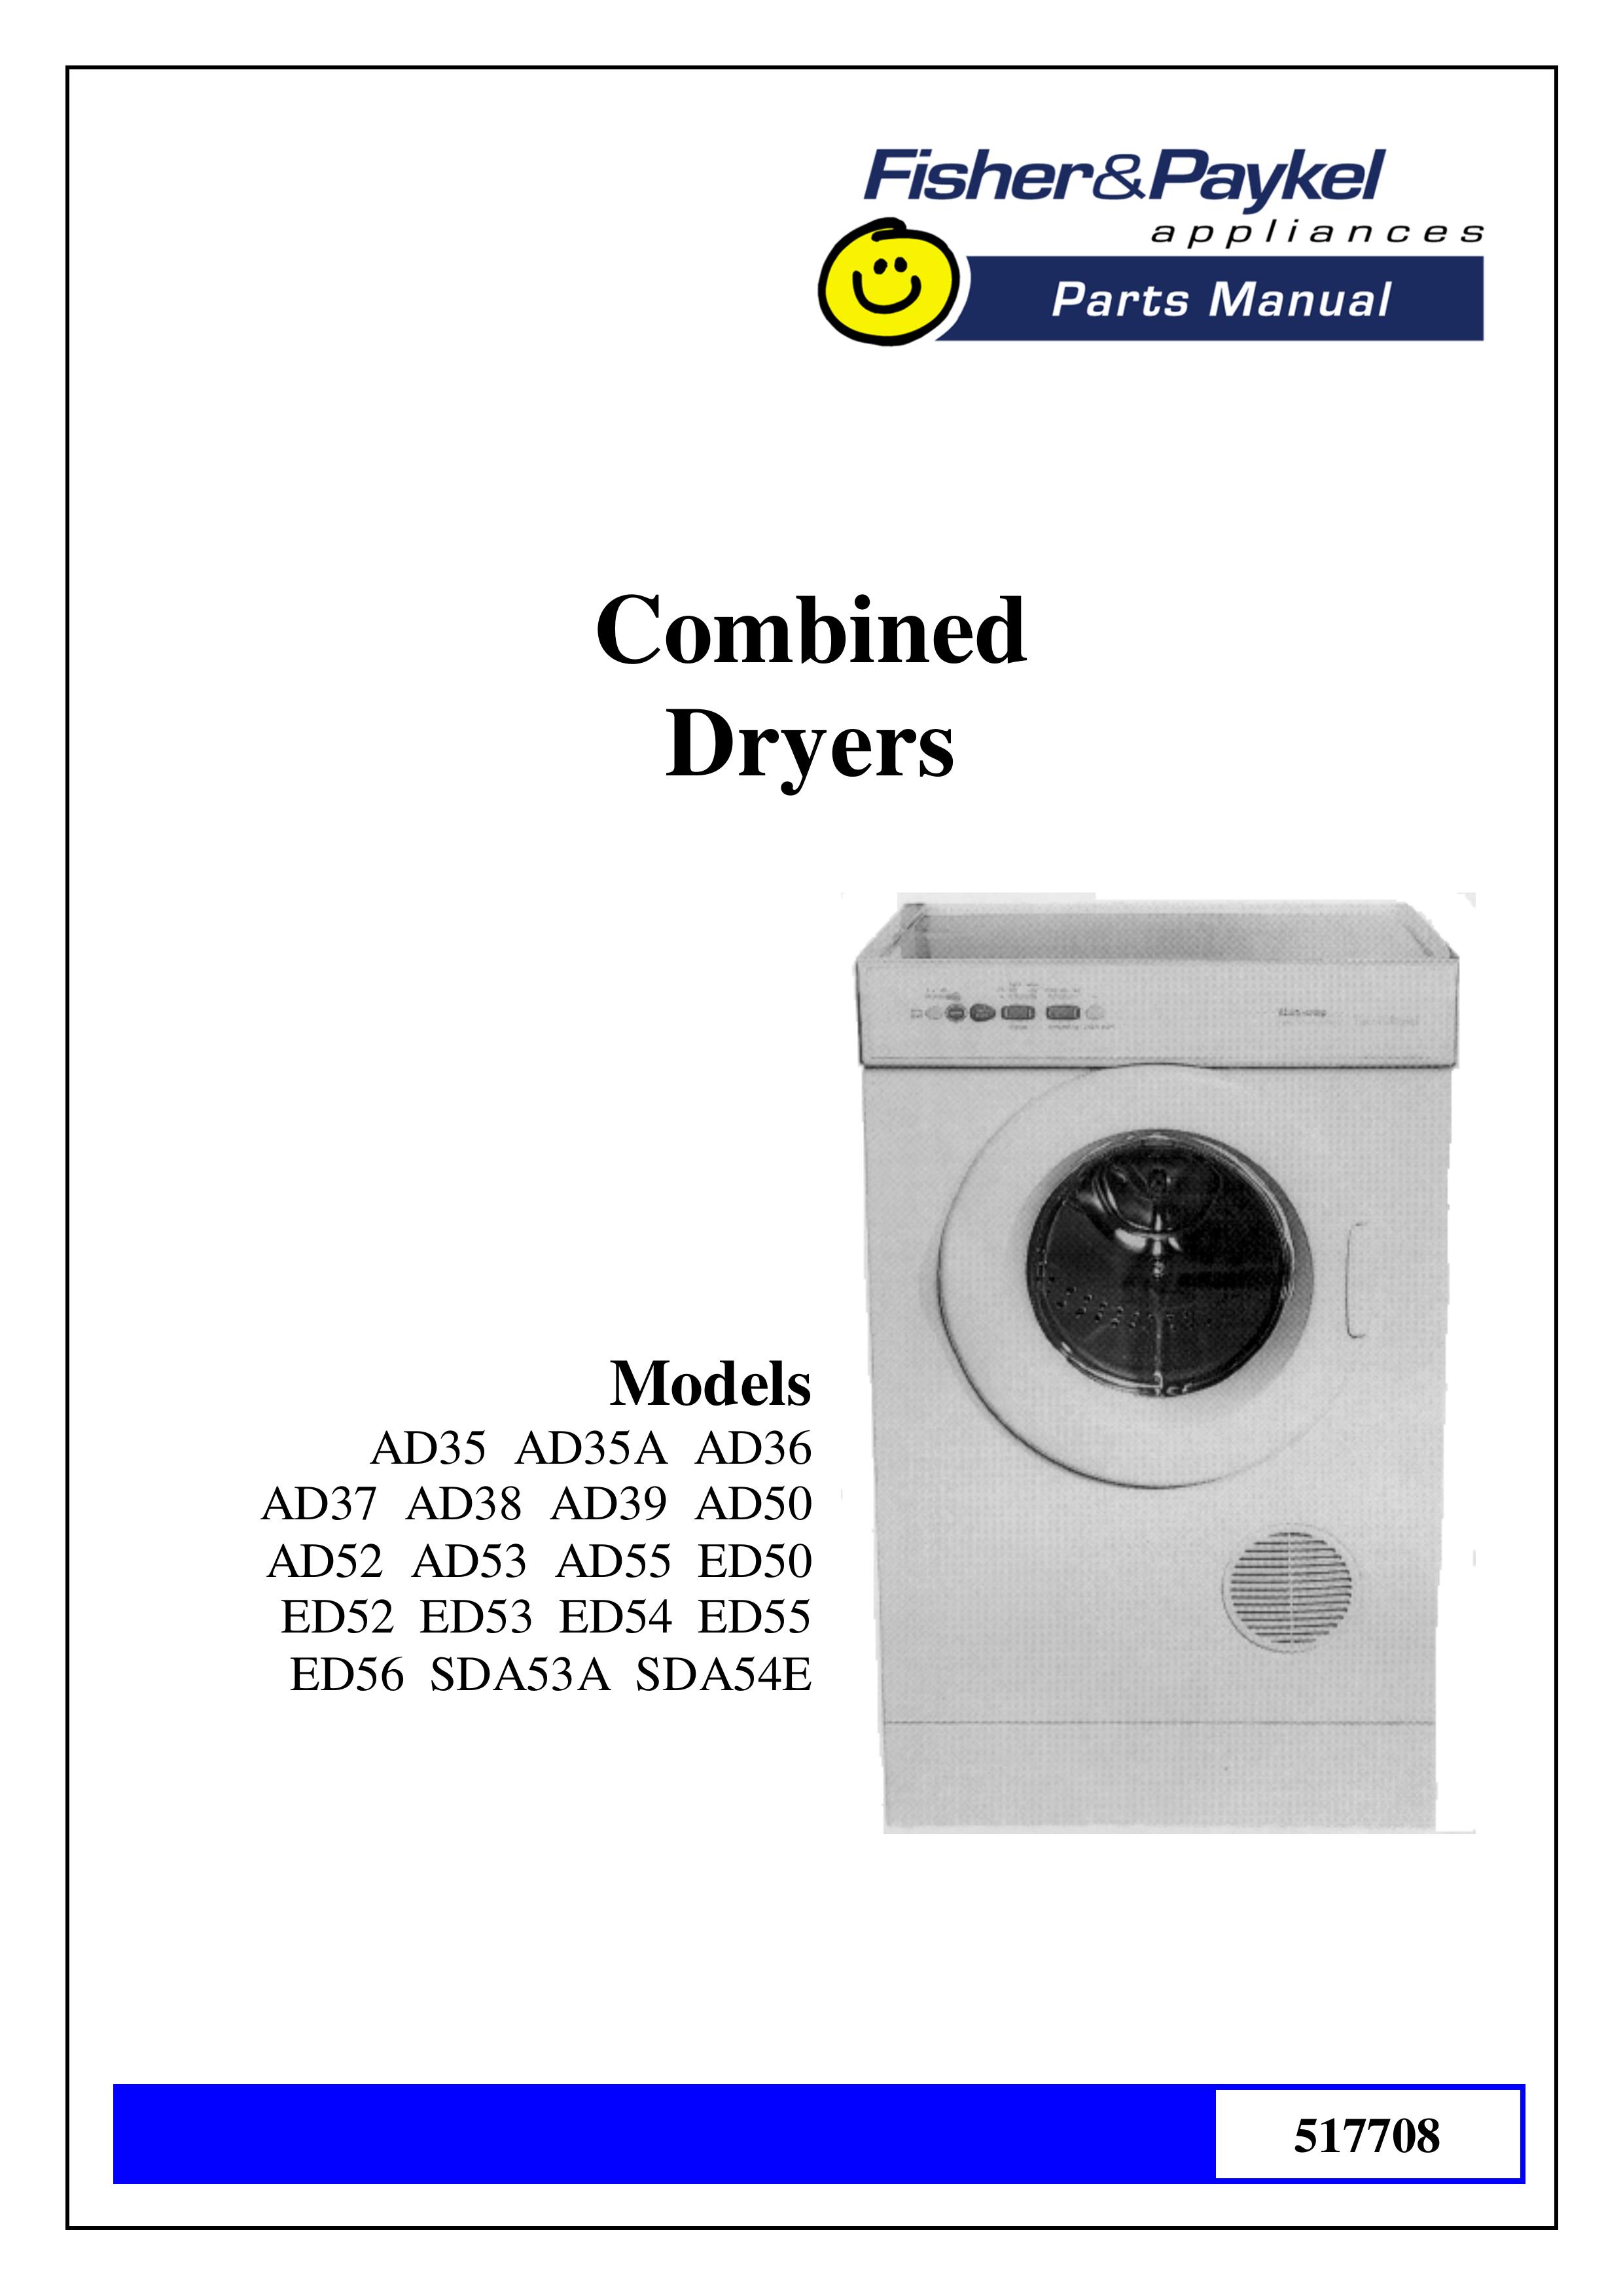 Fisher & Paykel ED56 Clothes Dryer User Manual